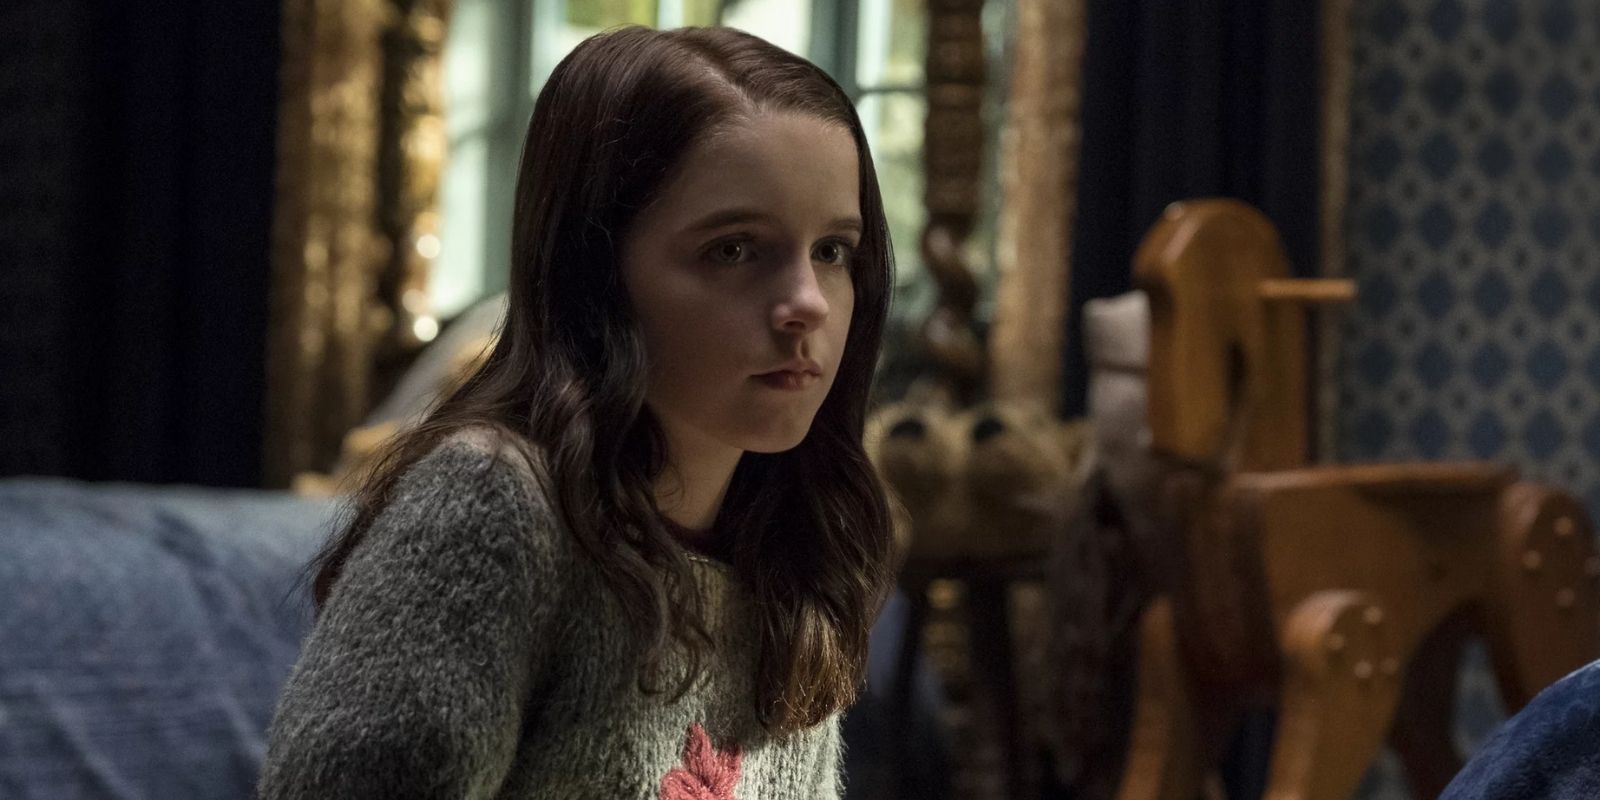 Young Theo Crain sits in her bedroom in The Haunting of Hill House